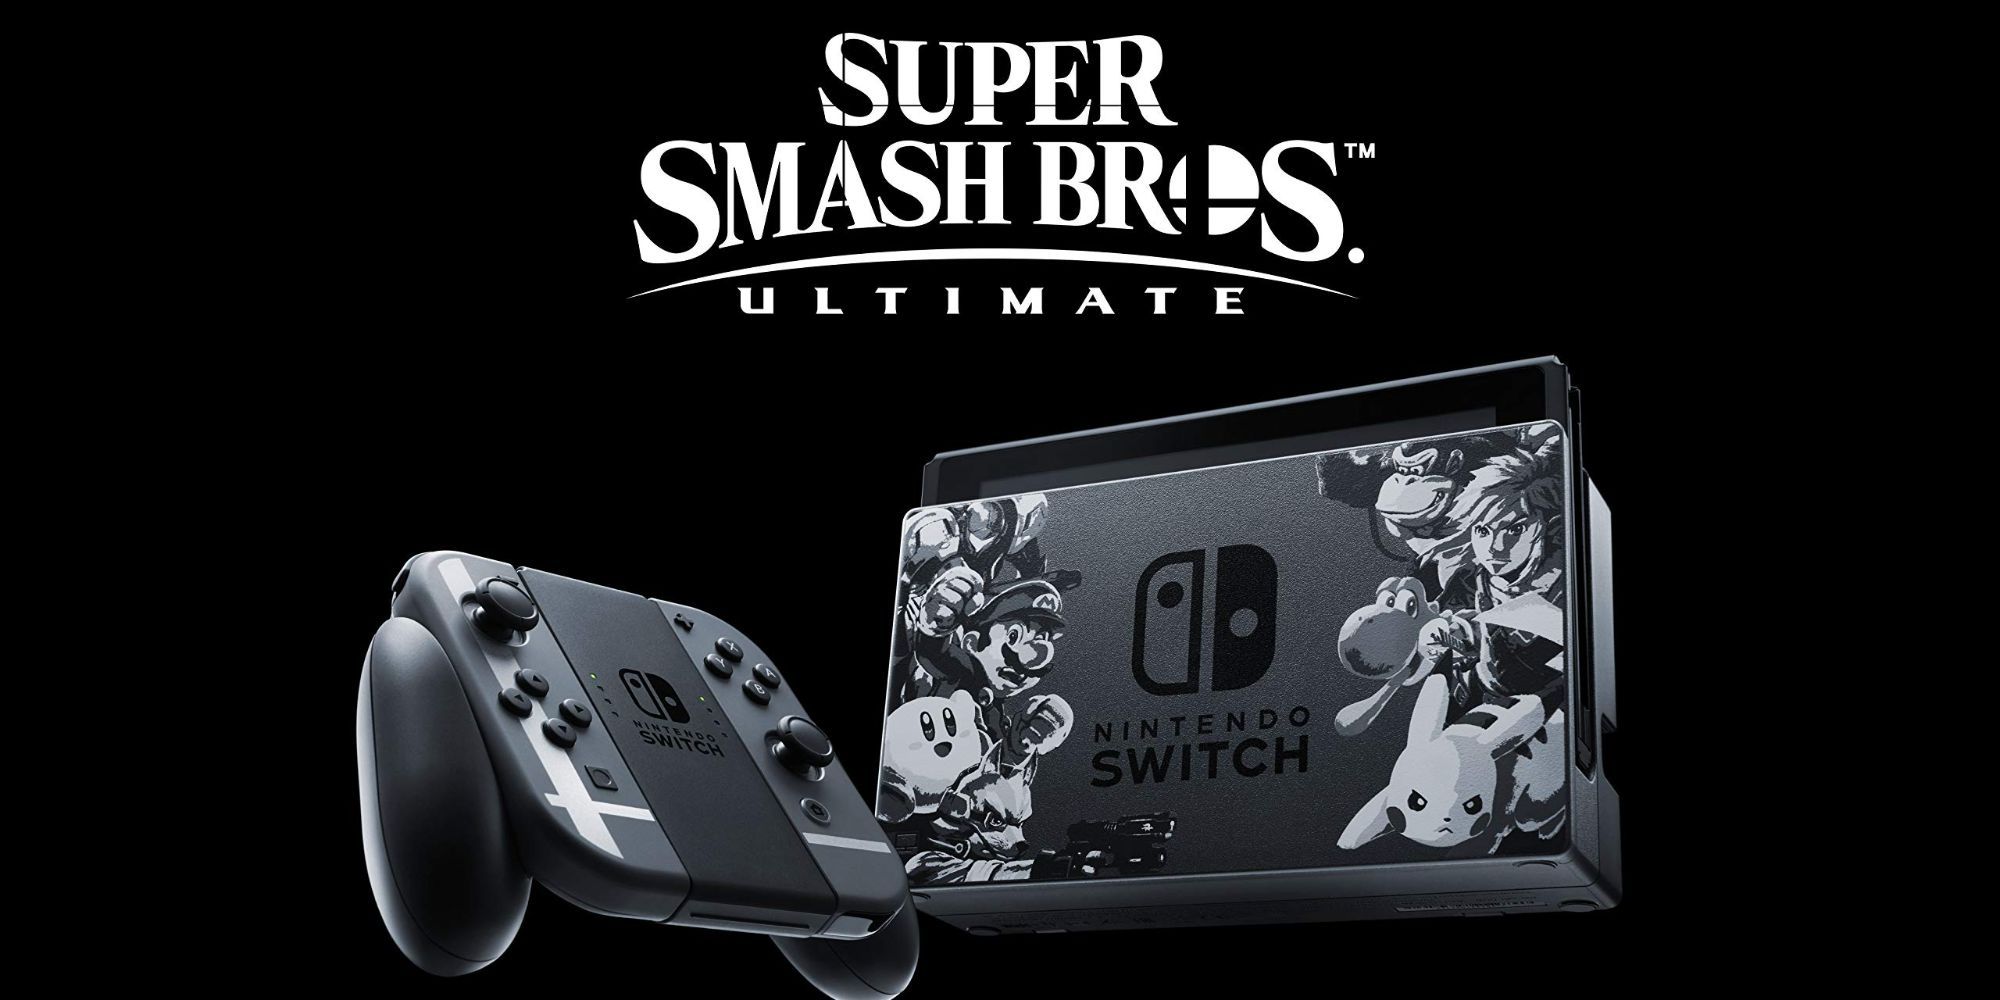 A  Nintendo Switch dock on a black background next to Joy-Cons below the Super Smash Bros Ultimate logo